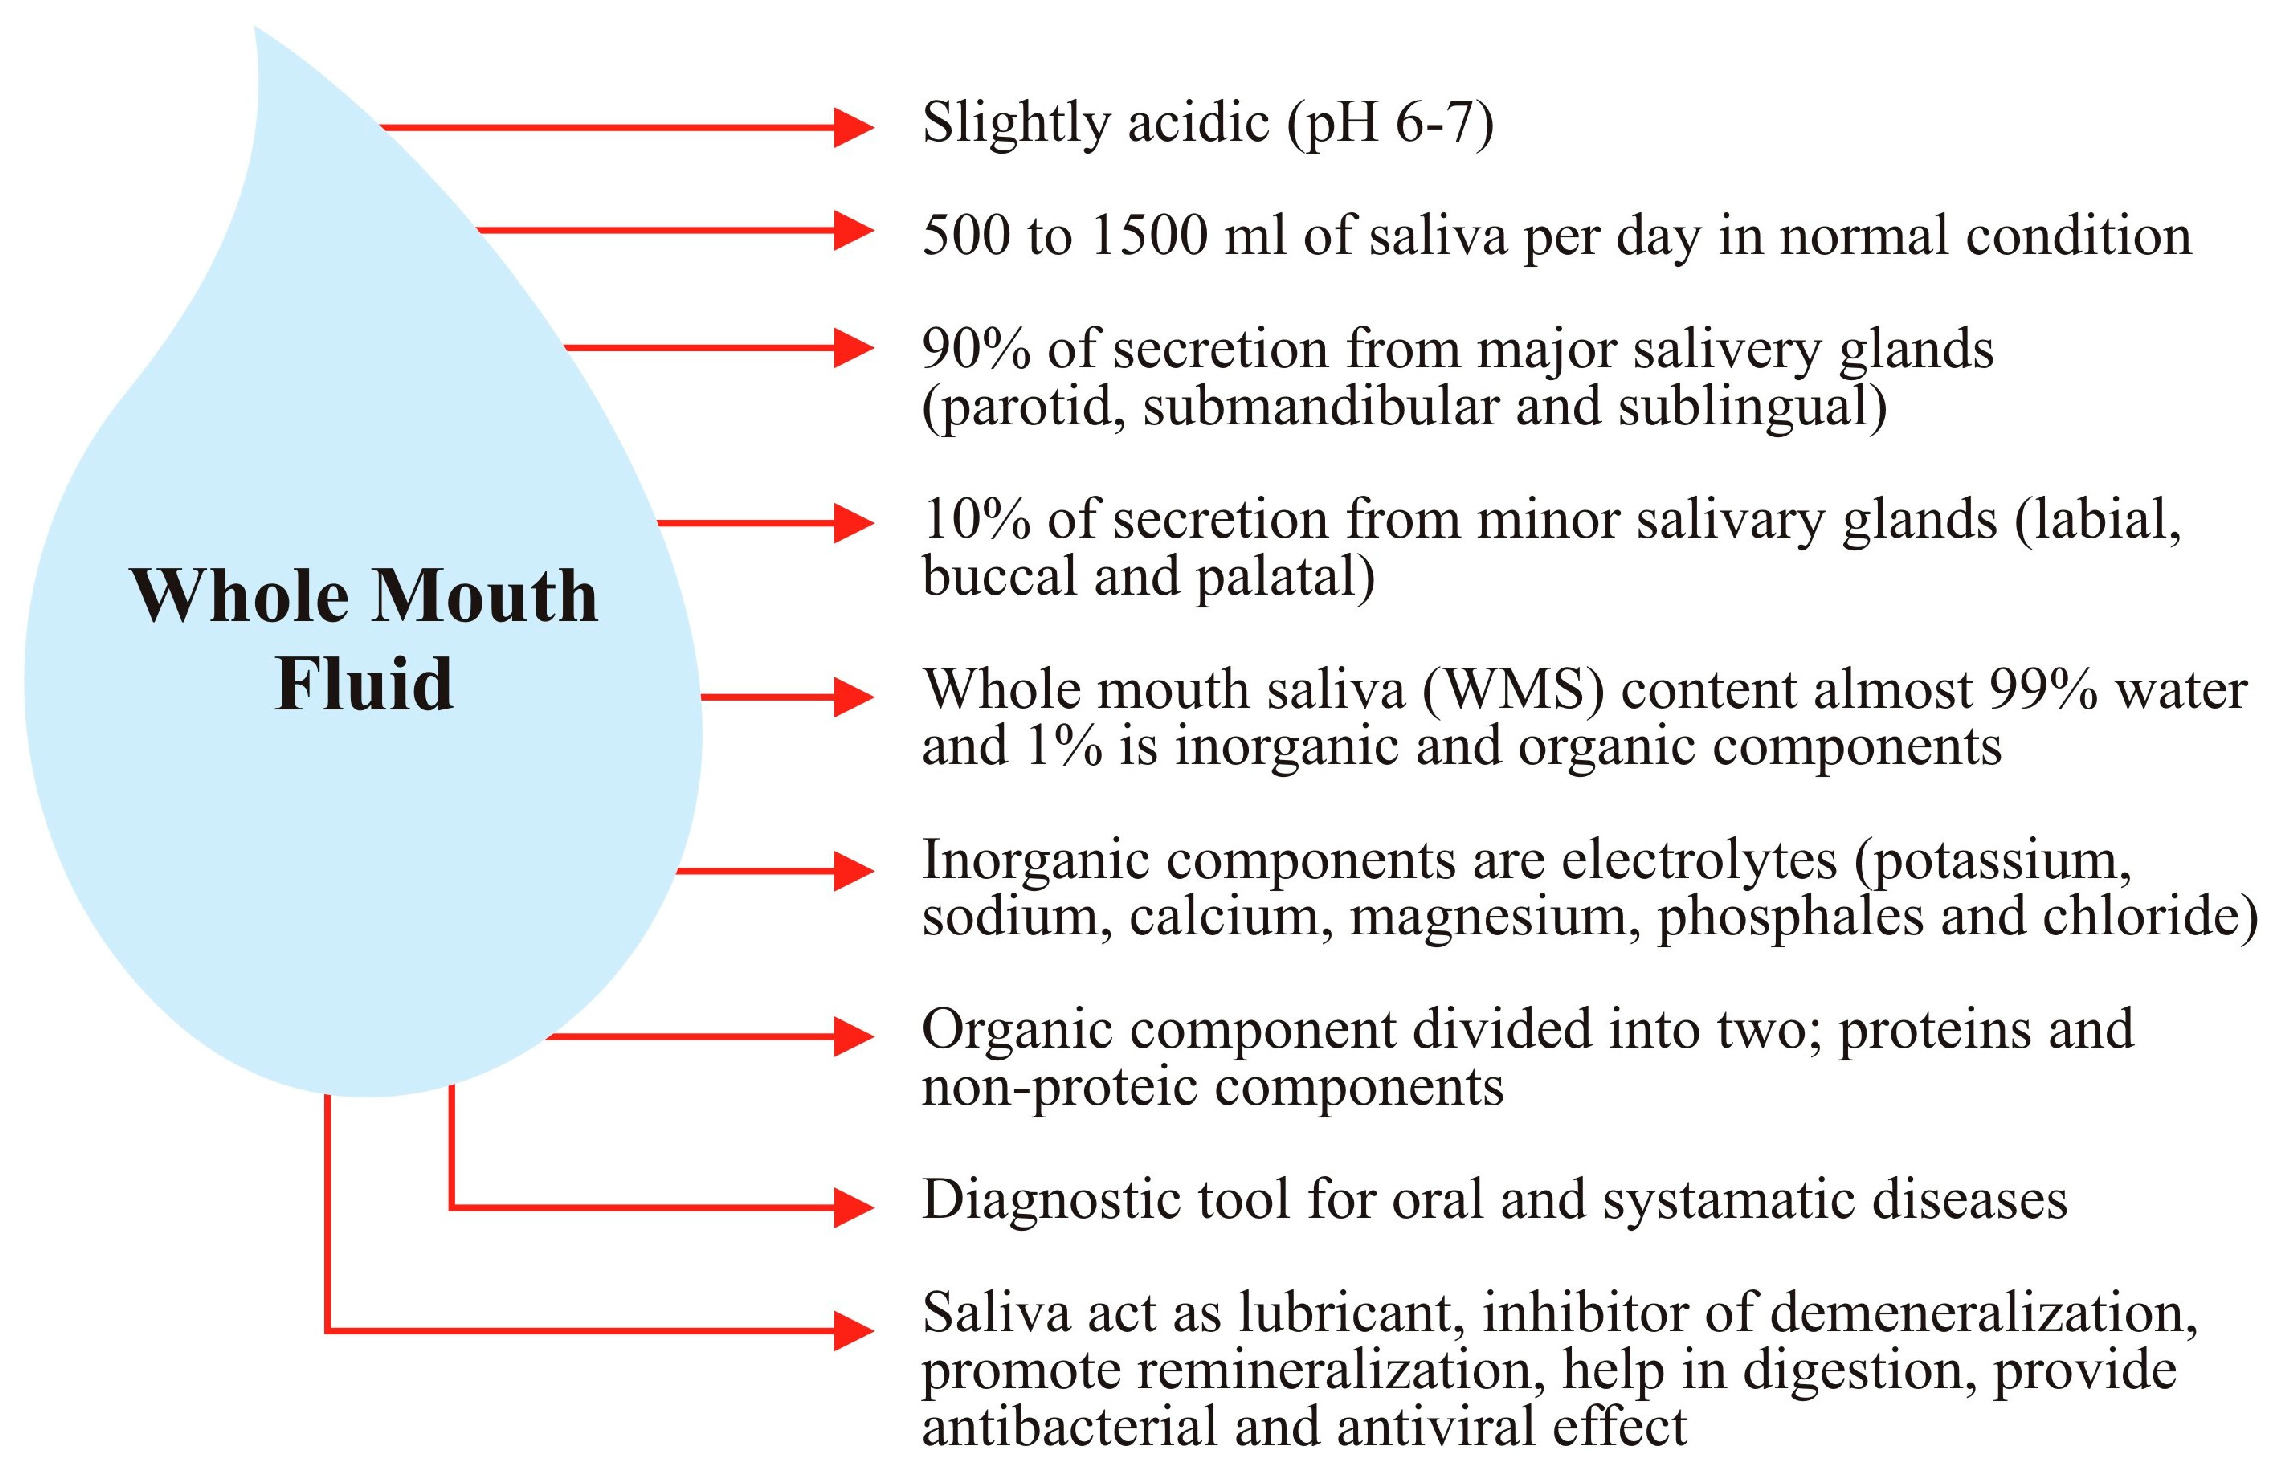 Cool Jobs: Saliva offers a spitting image of our health